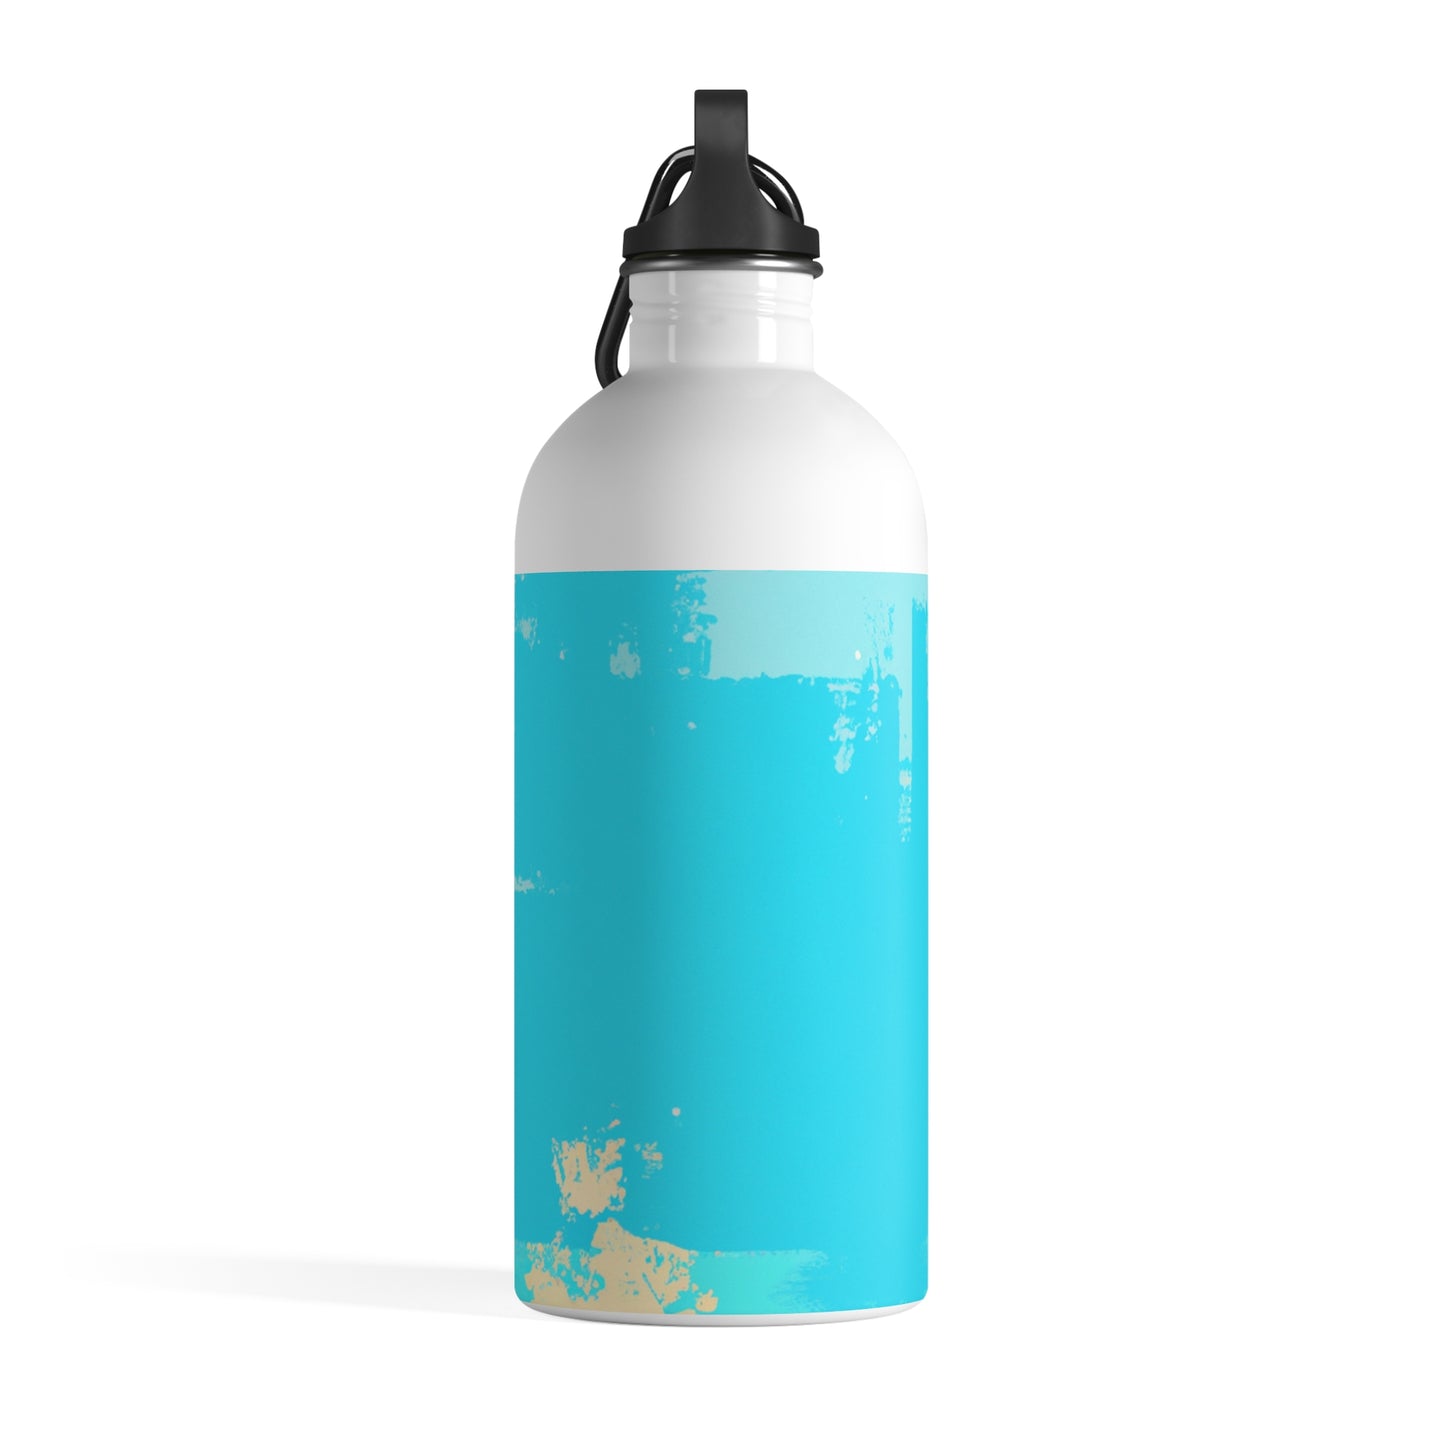 "A Breezy Skyscape: A Combination of Tradition and Modernity" - The Alien Stainless Steel Water Bottle